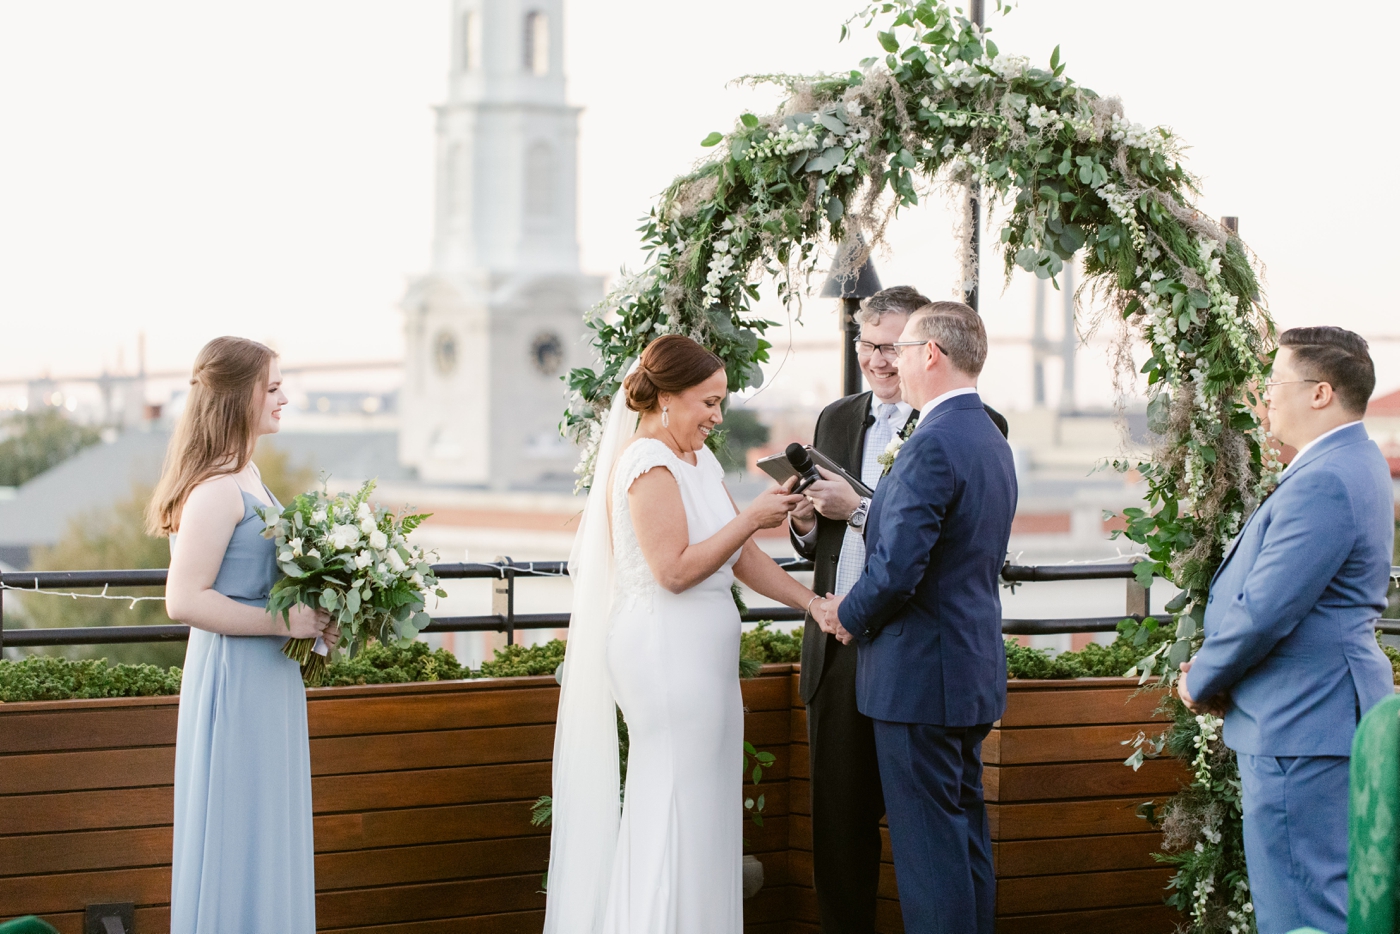 Couple reading their vows at their sunset rooftop ceremony in Savannah